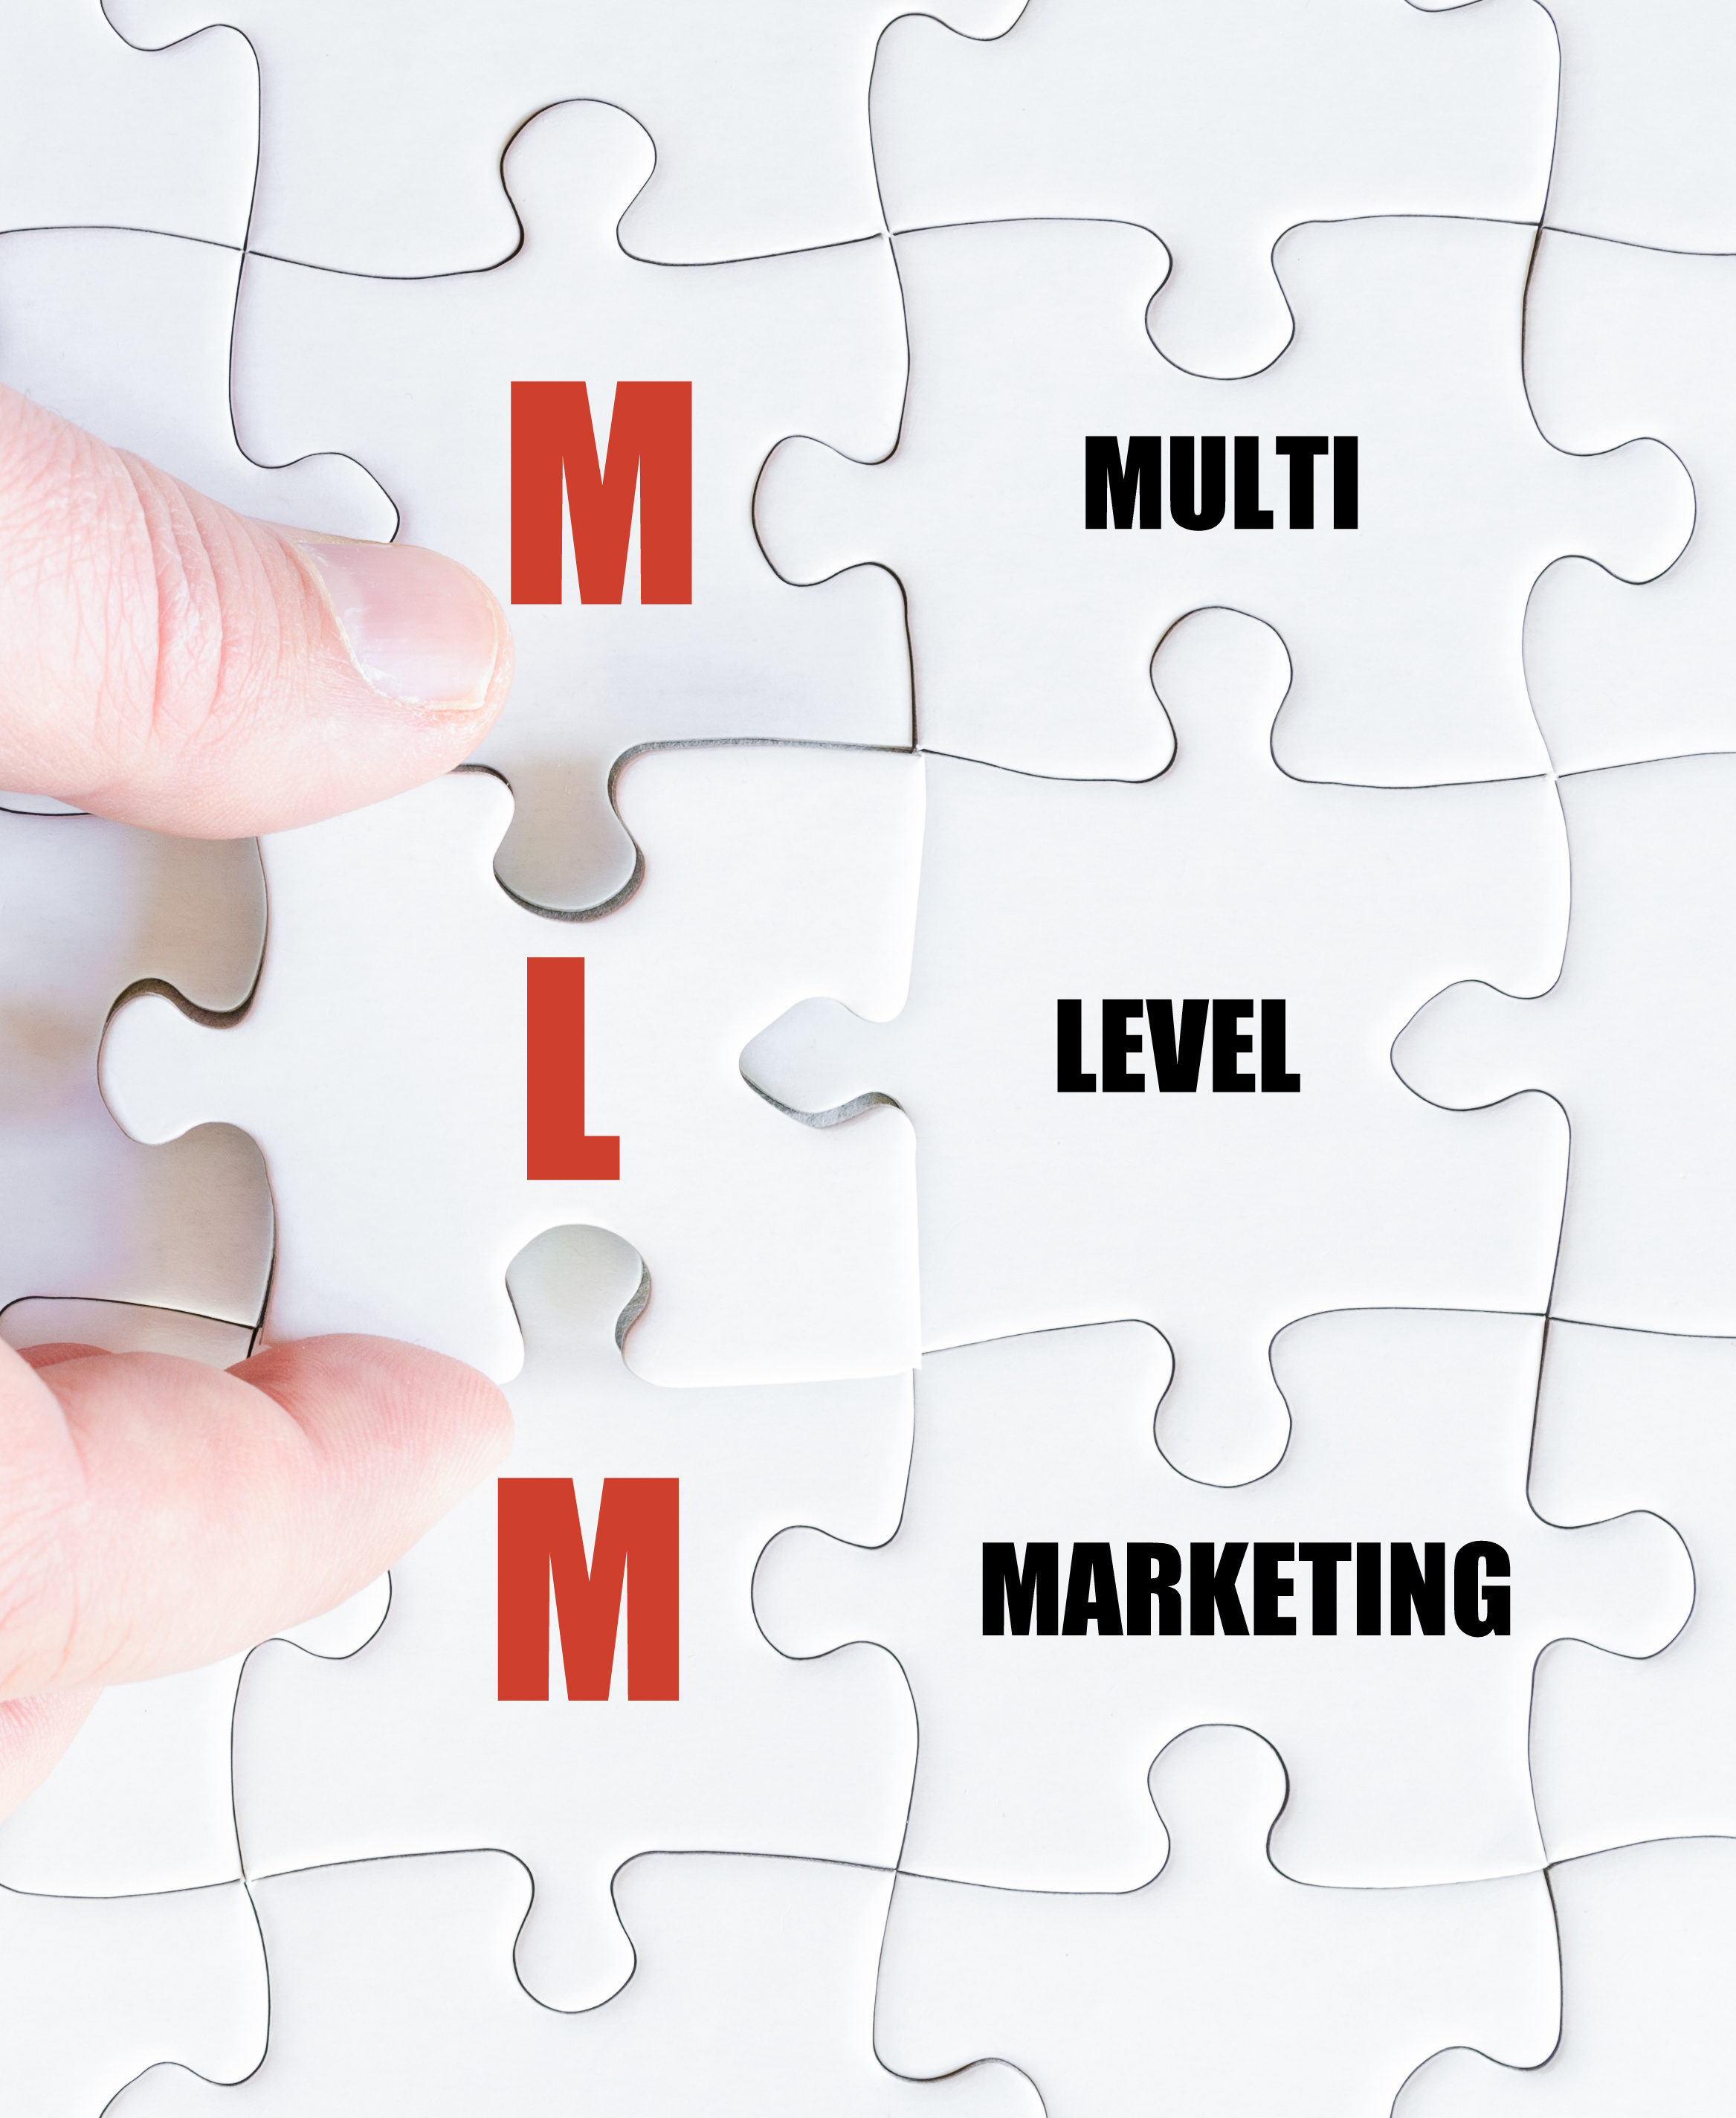  MLM Software multilevel marketing software and services Xennsoft